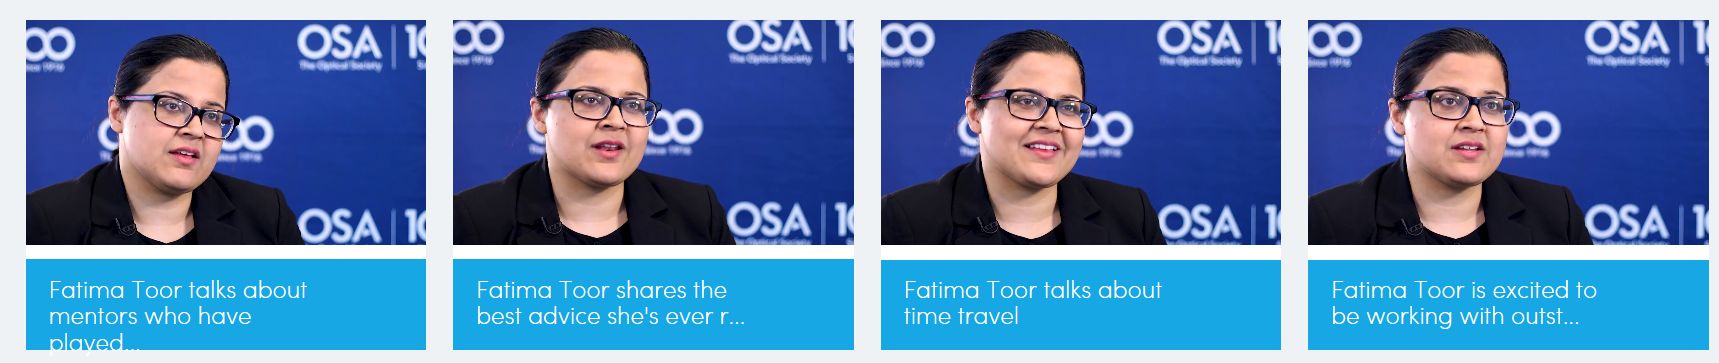 Images from Prof. Toor's OSA interview